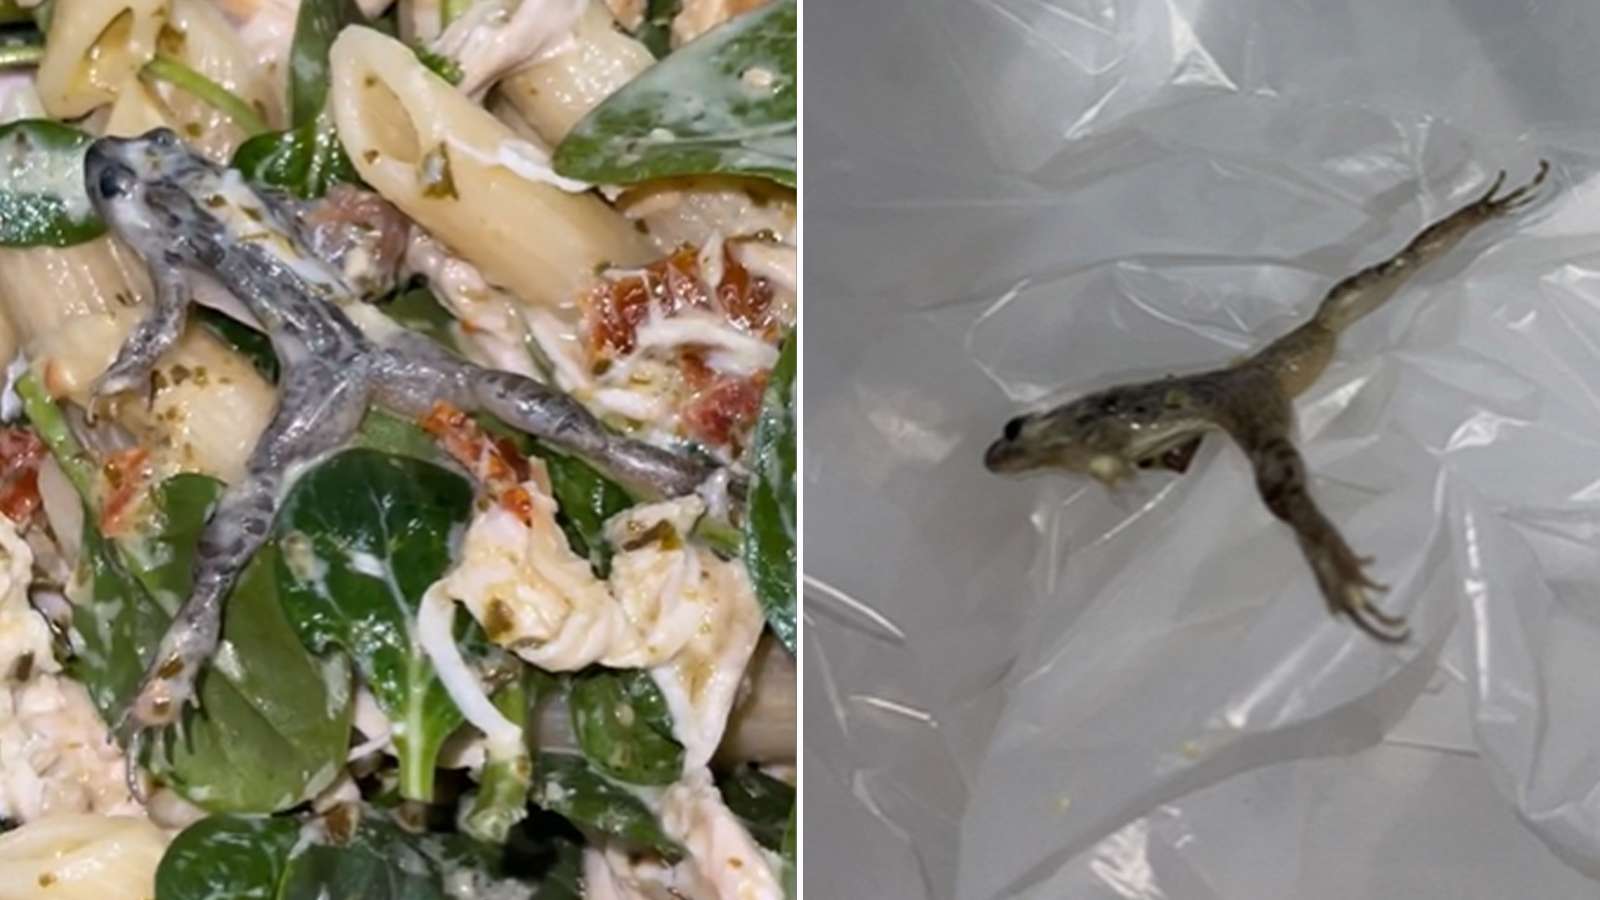 woman-finds-frog-in-salad-traumatized-tiktok-viral